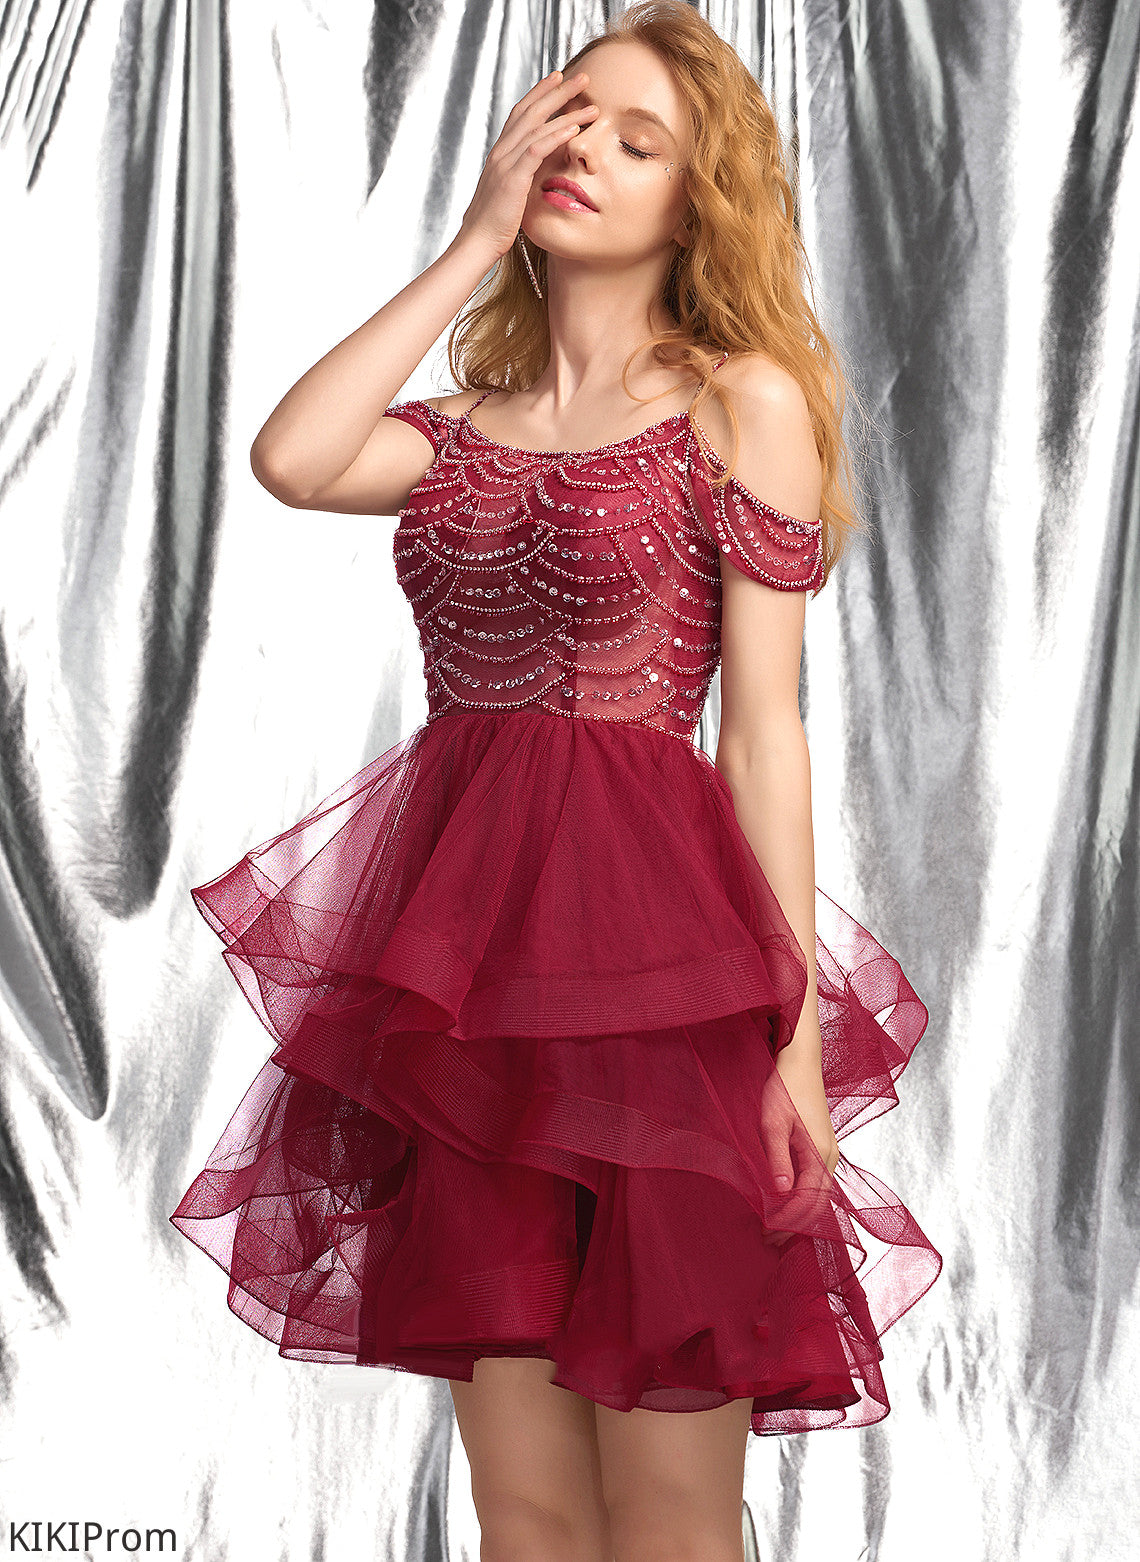 Dress Short/Mini Ball-Gown/Princess Homecoming Beading With Scoop Neck Eliza Sequins Tulle Homecoming Dresses